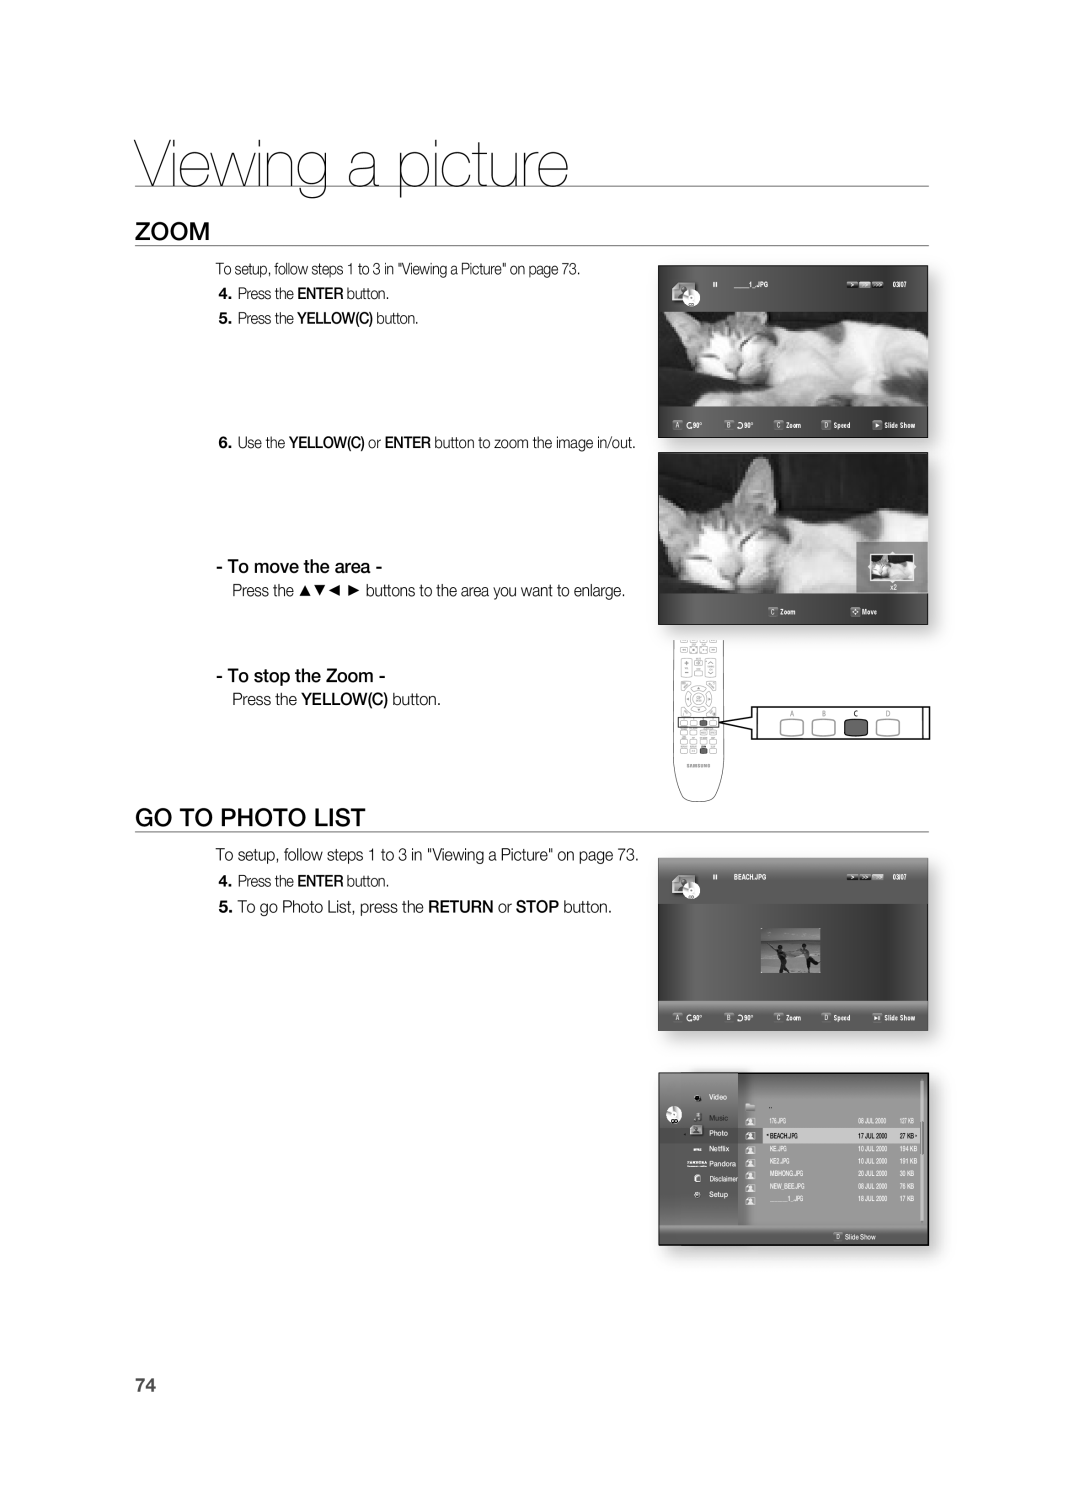 Samsung AH68-02178Z, HT-BD1200 user manual Go To Photo List, Viewing a picture, To move the area, To stop the Zoom 